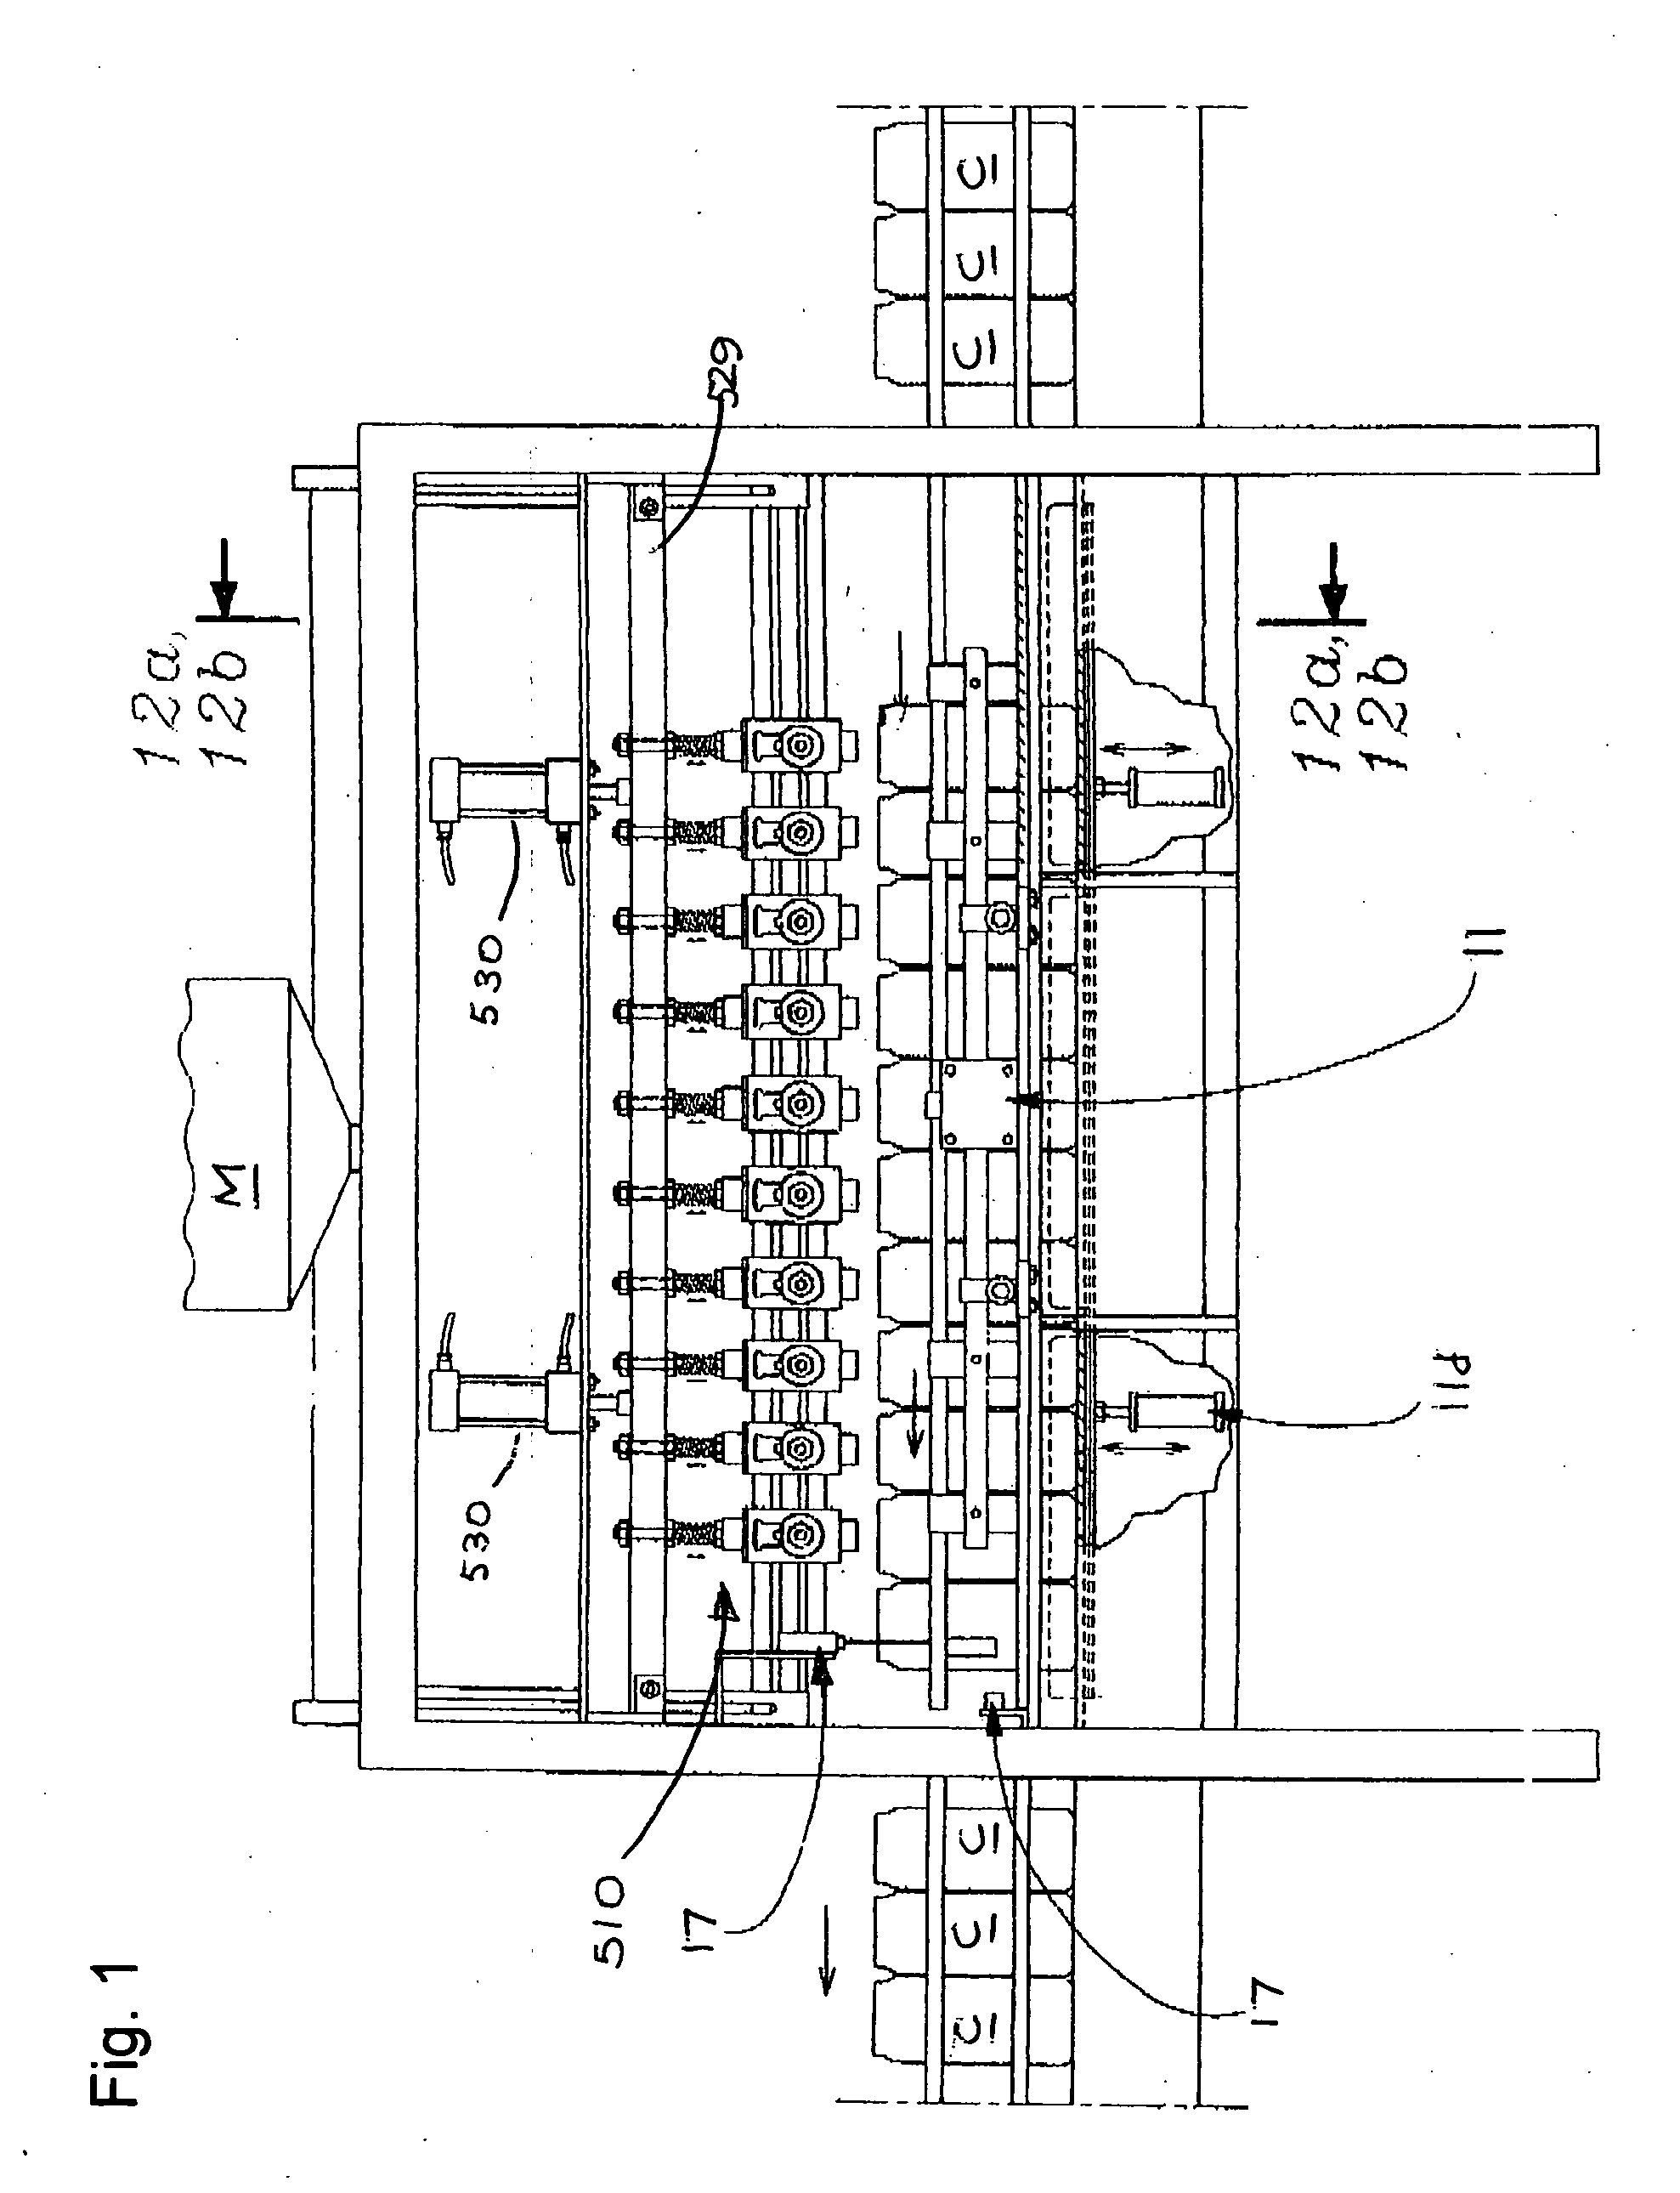 Apparatus for the simultaenous filling of precise amounts of viscous liquid material in a sanitary environment